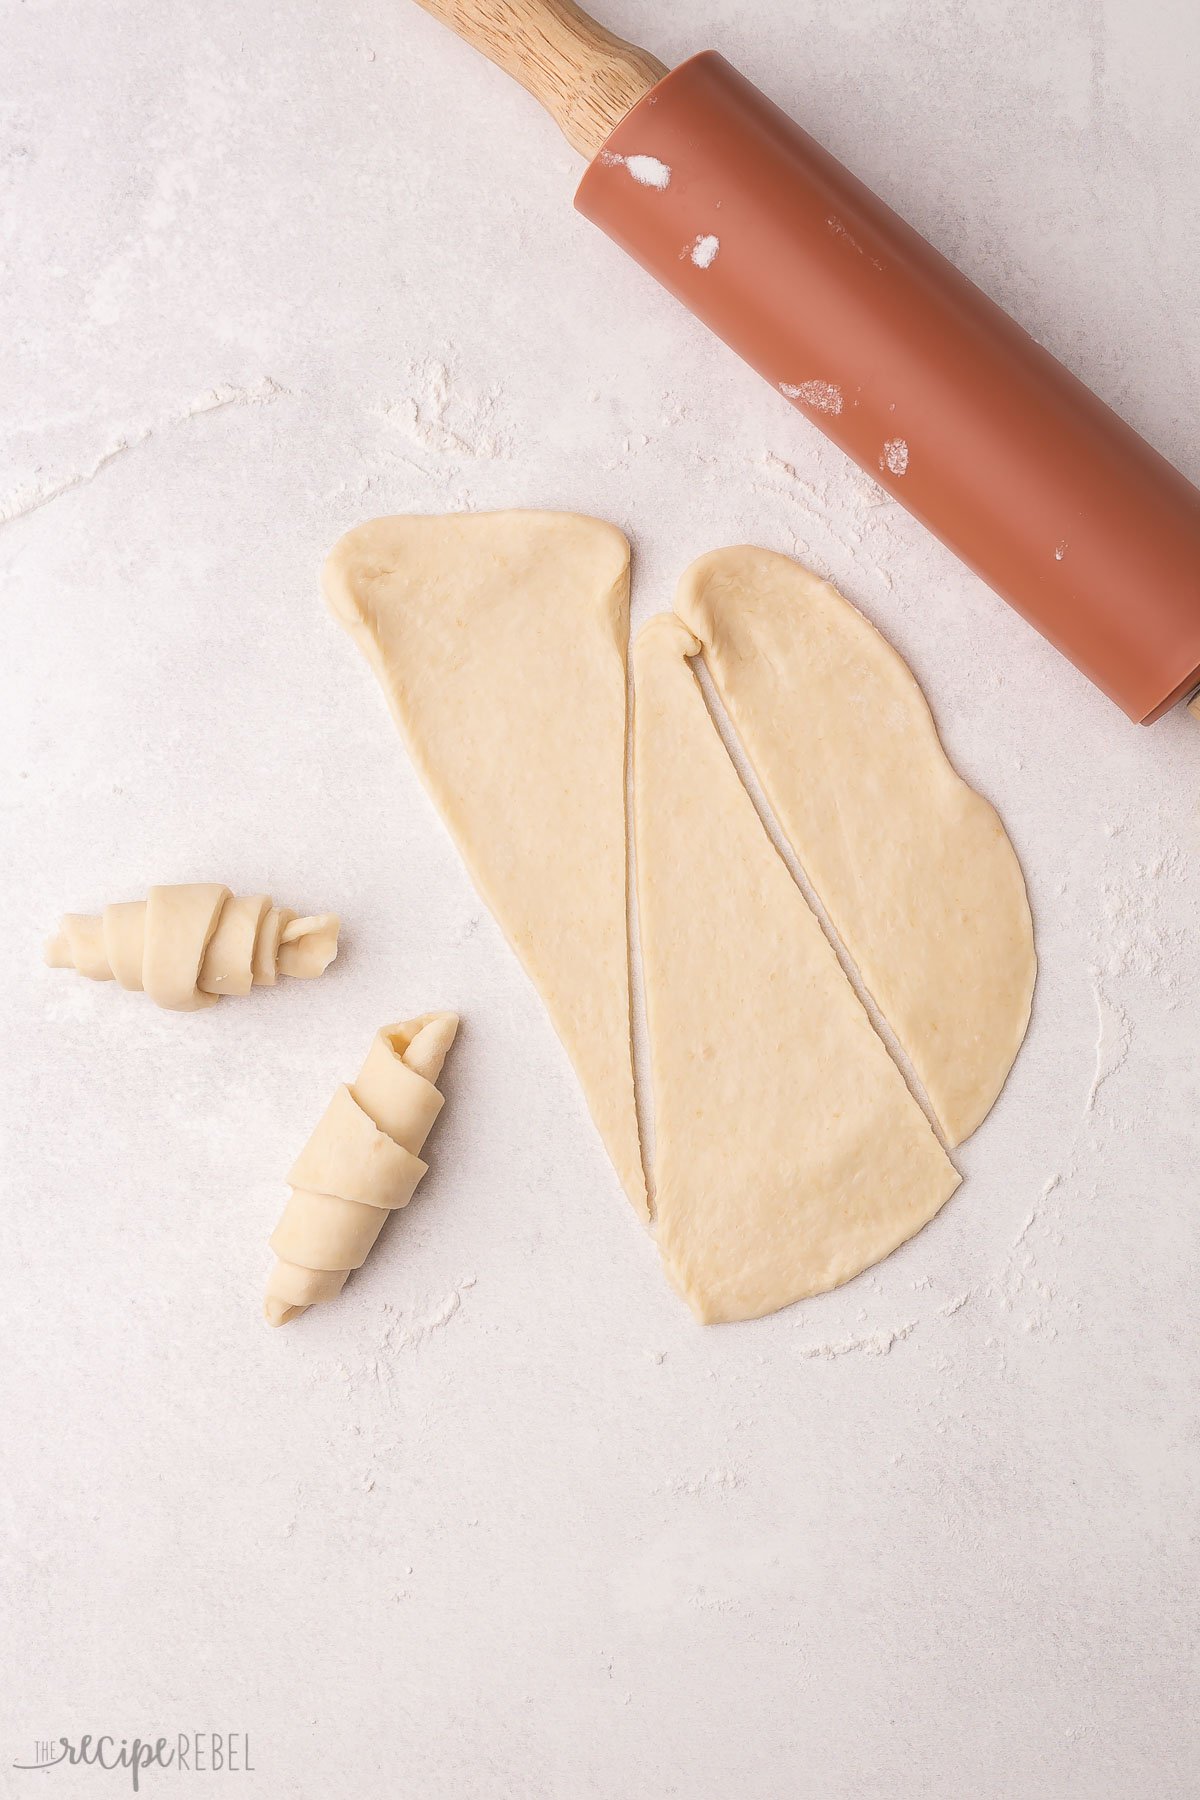 dough rolled out with rolling pin cut into triangles.